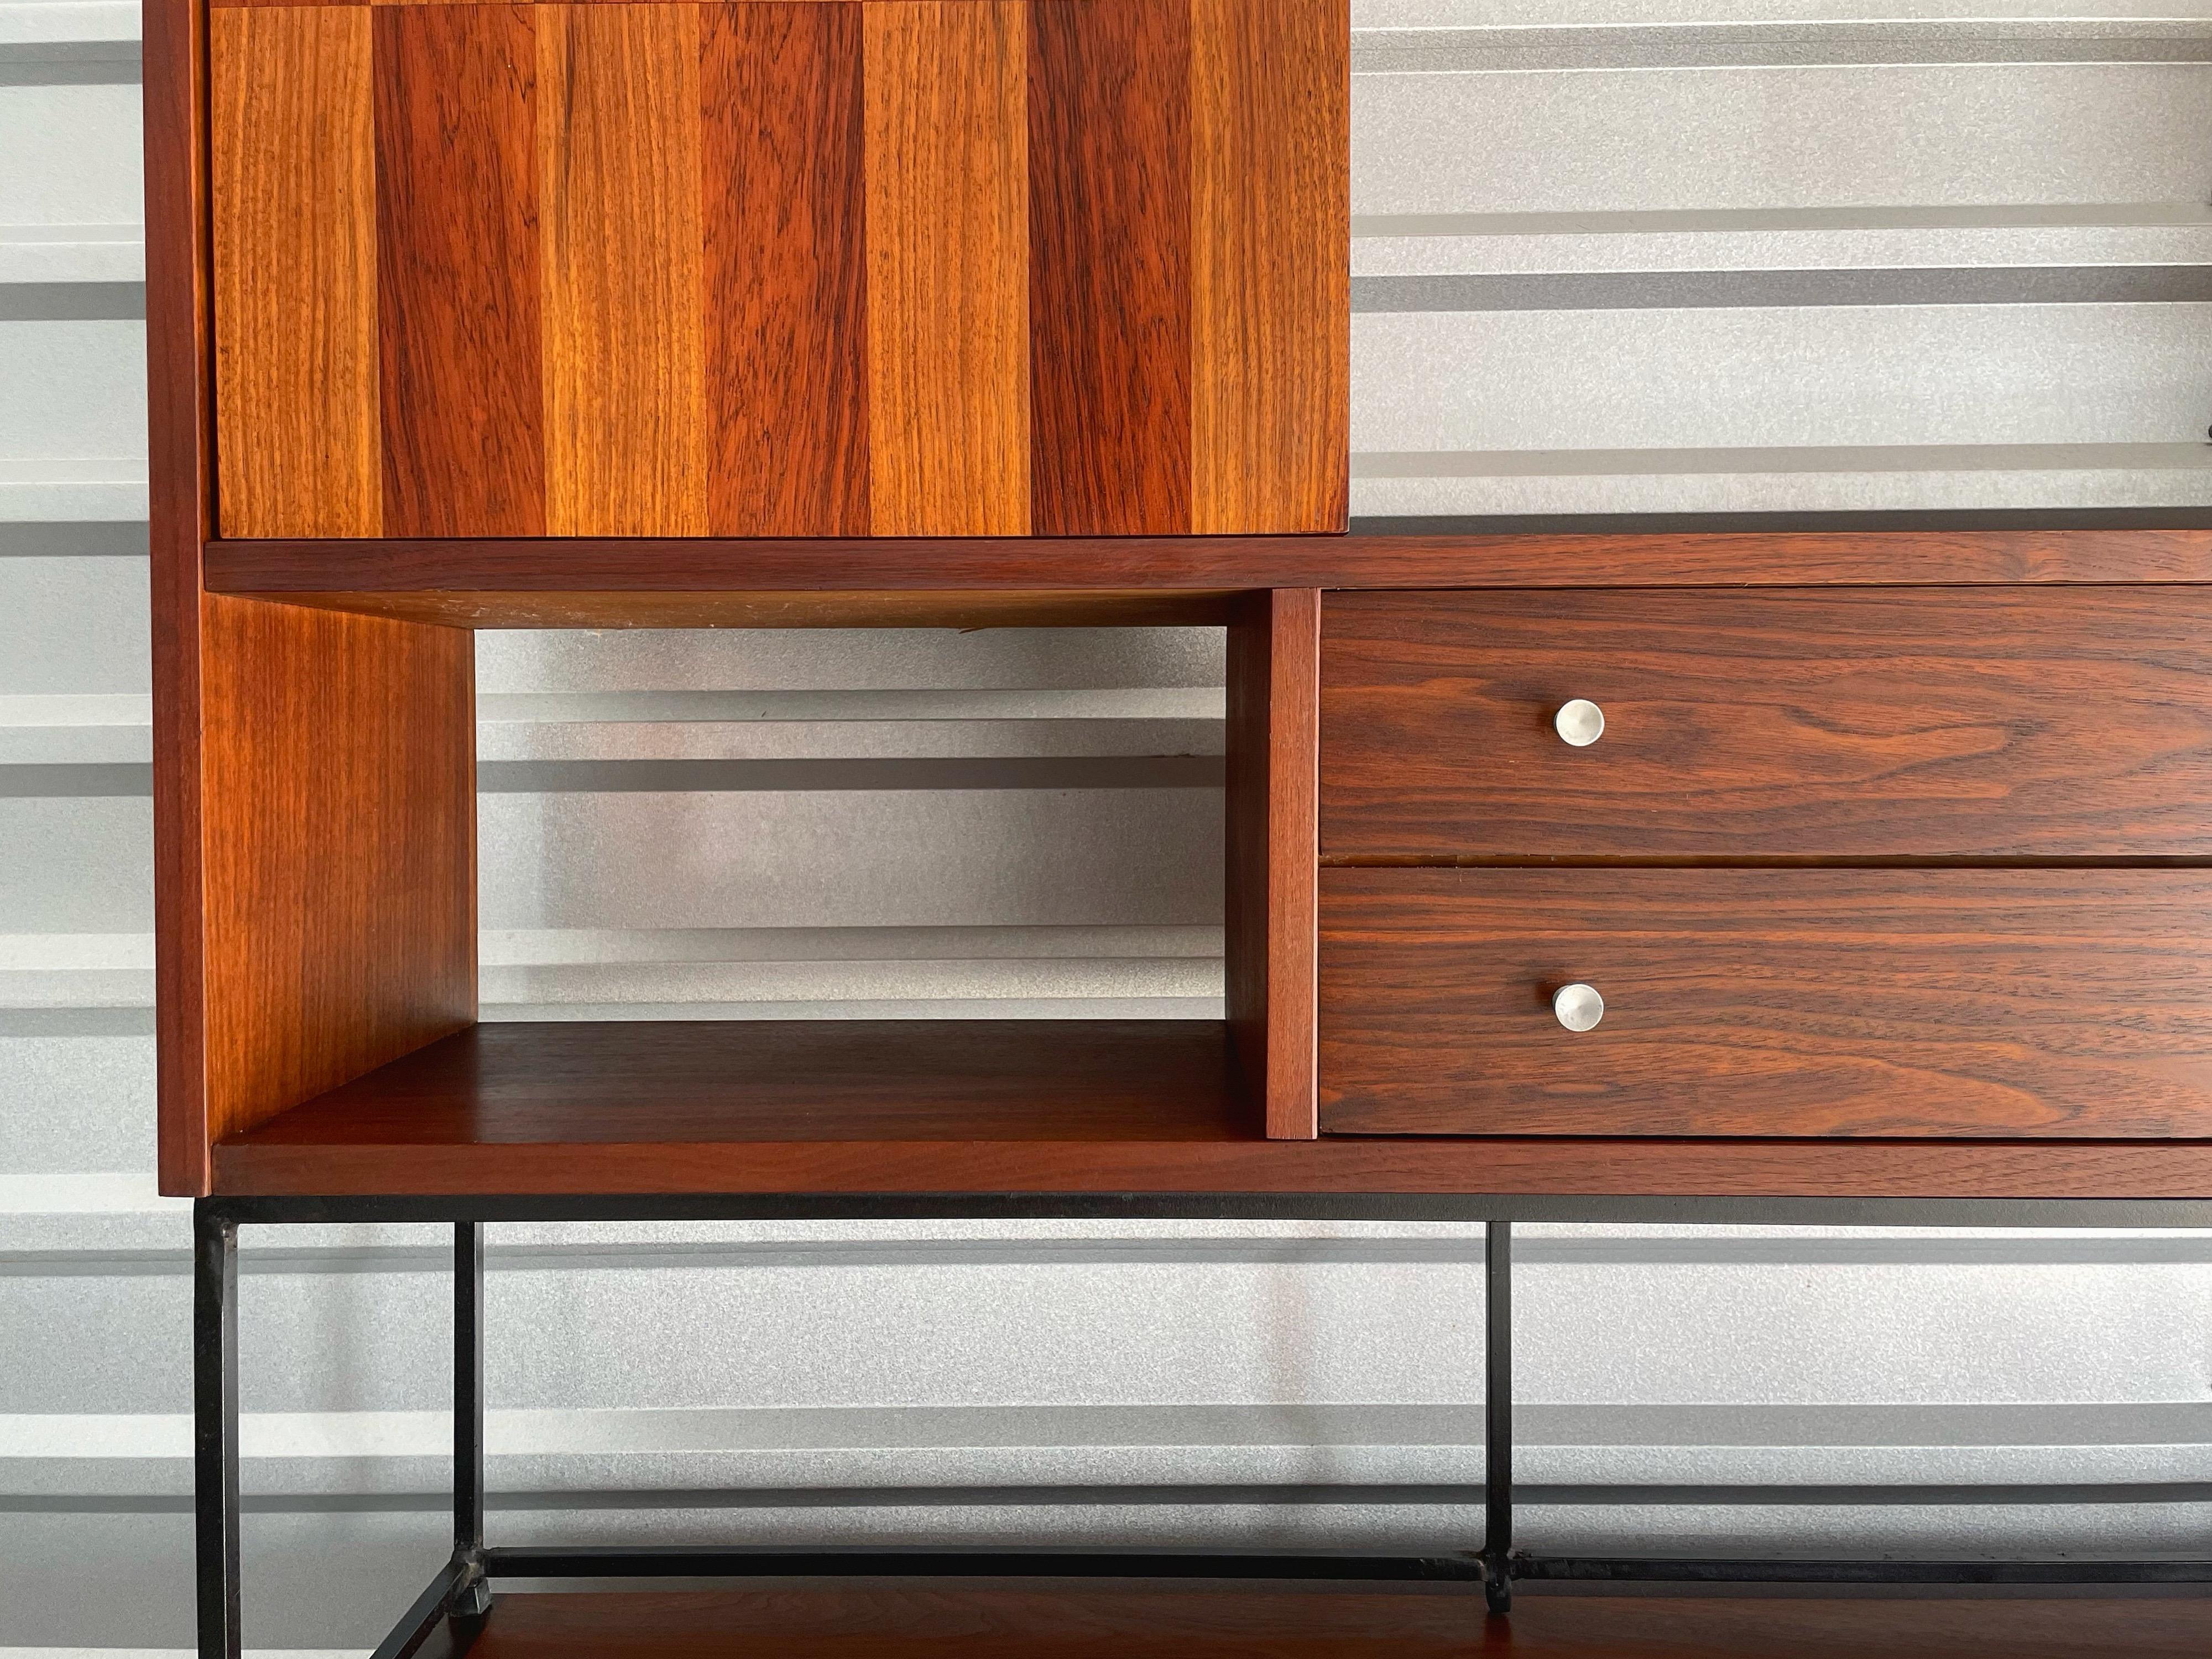 Monumental two-piece Mid-Century Modern credenza and hutch top designed by H. Paul Browning and produced by Stanley. Walnut cases with rosewood inlay and brushed aluminum pulls. Hutch top rests on a wrought iron base. Adjustable shelved space on the